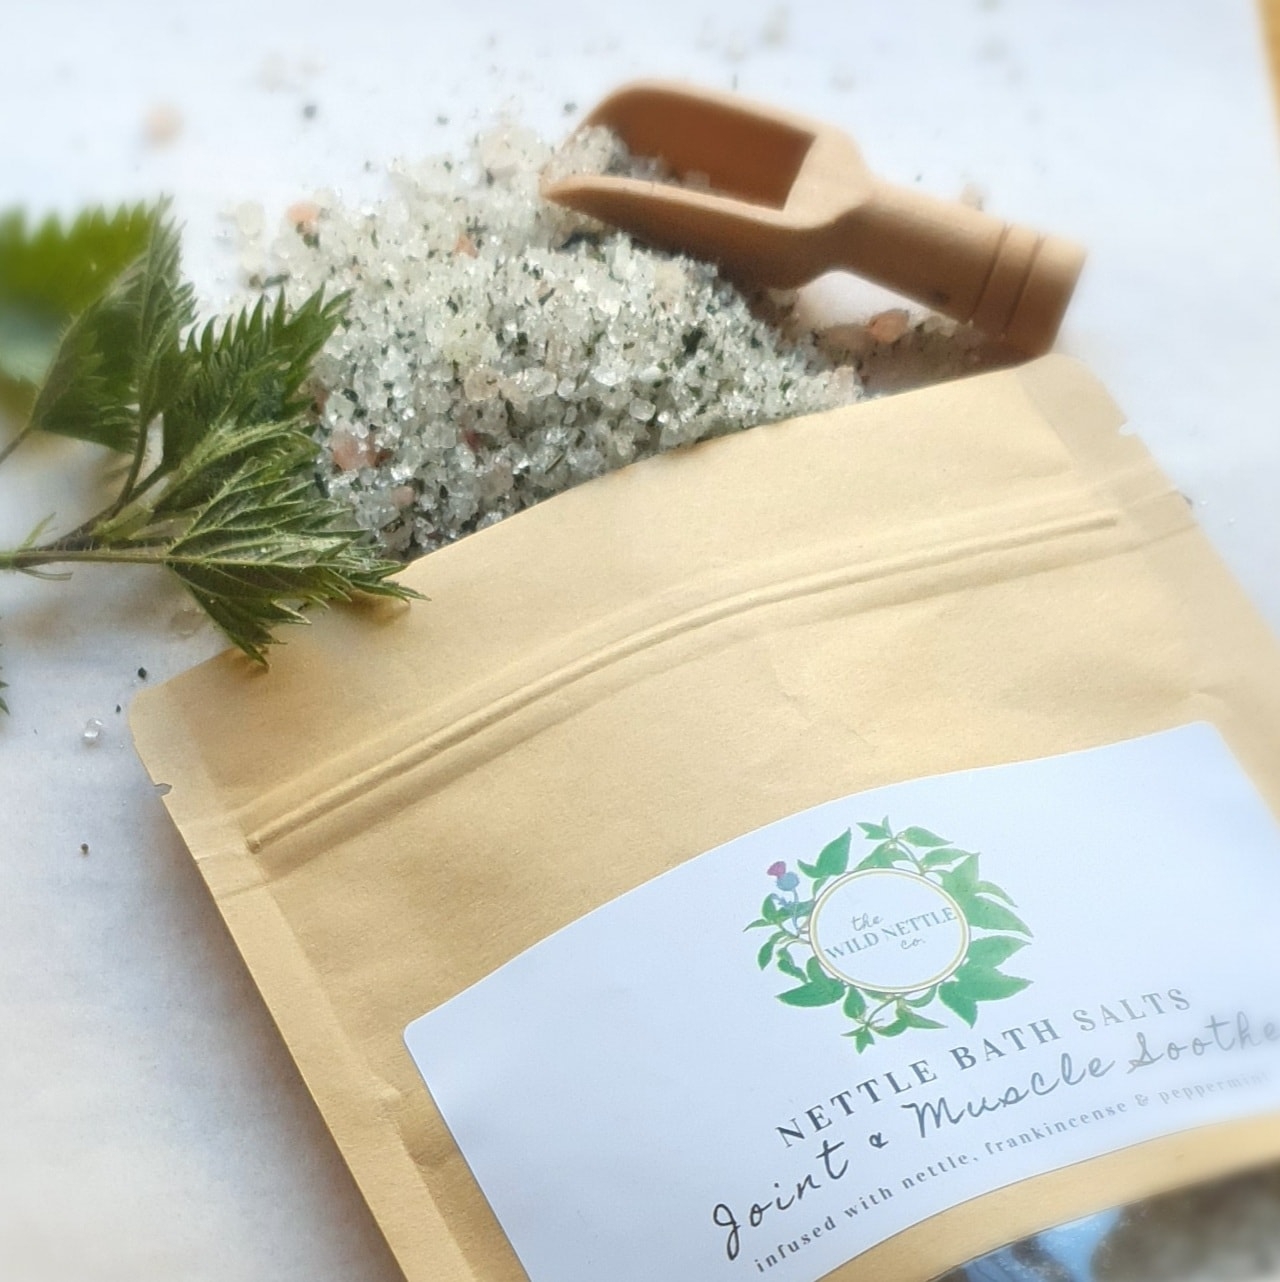 Joint & Muscle Soothe – Bath Muscle Soak – The Wild Nettle Co